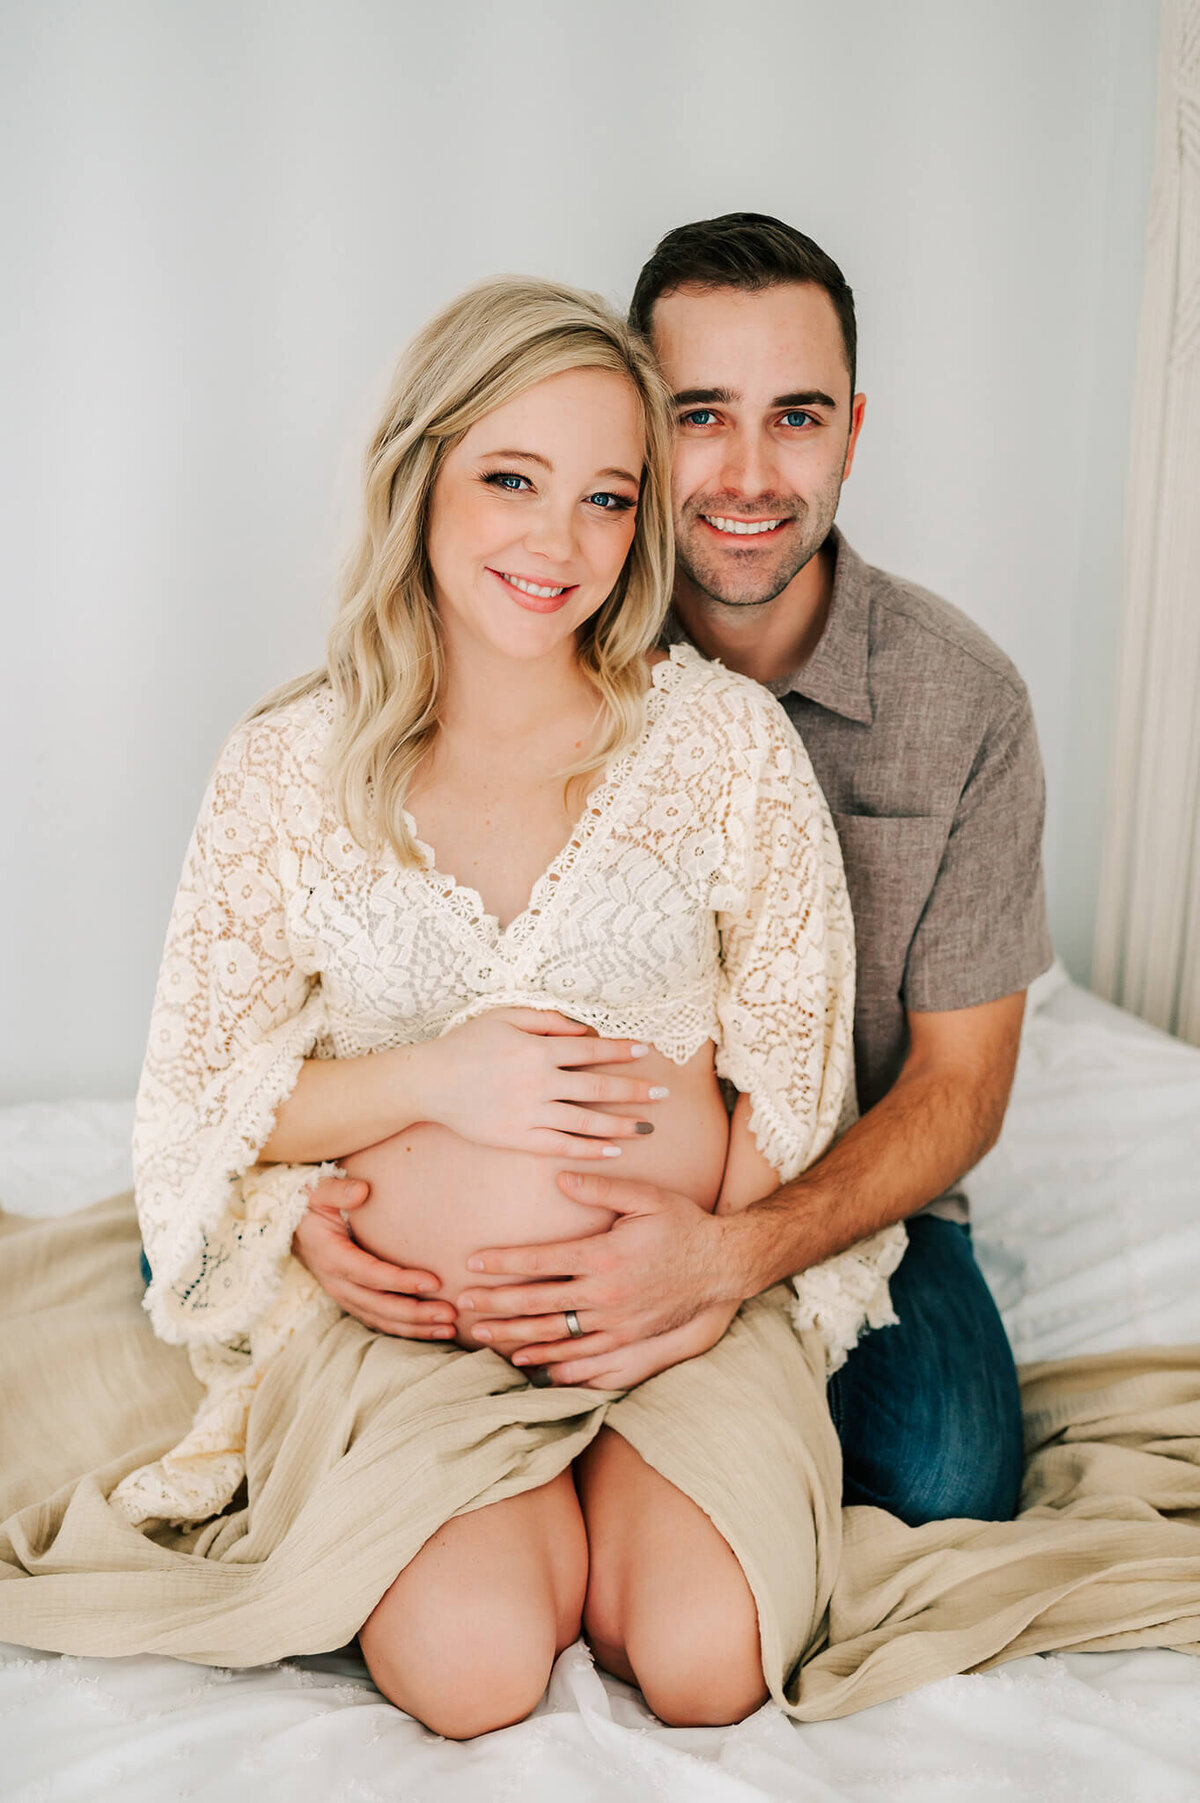 Springfield MO maternity photographer Jessica Kennedy of The XO Photography captures pregnant couple kneeling on bed smiling holding baby bump